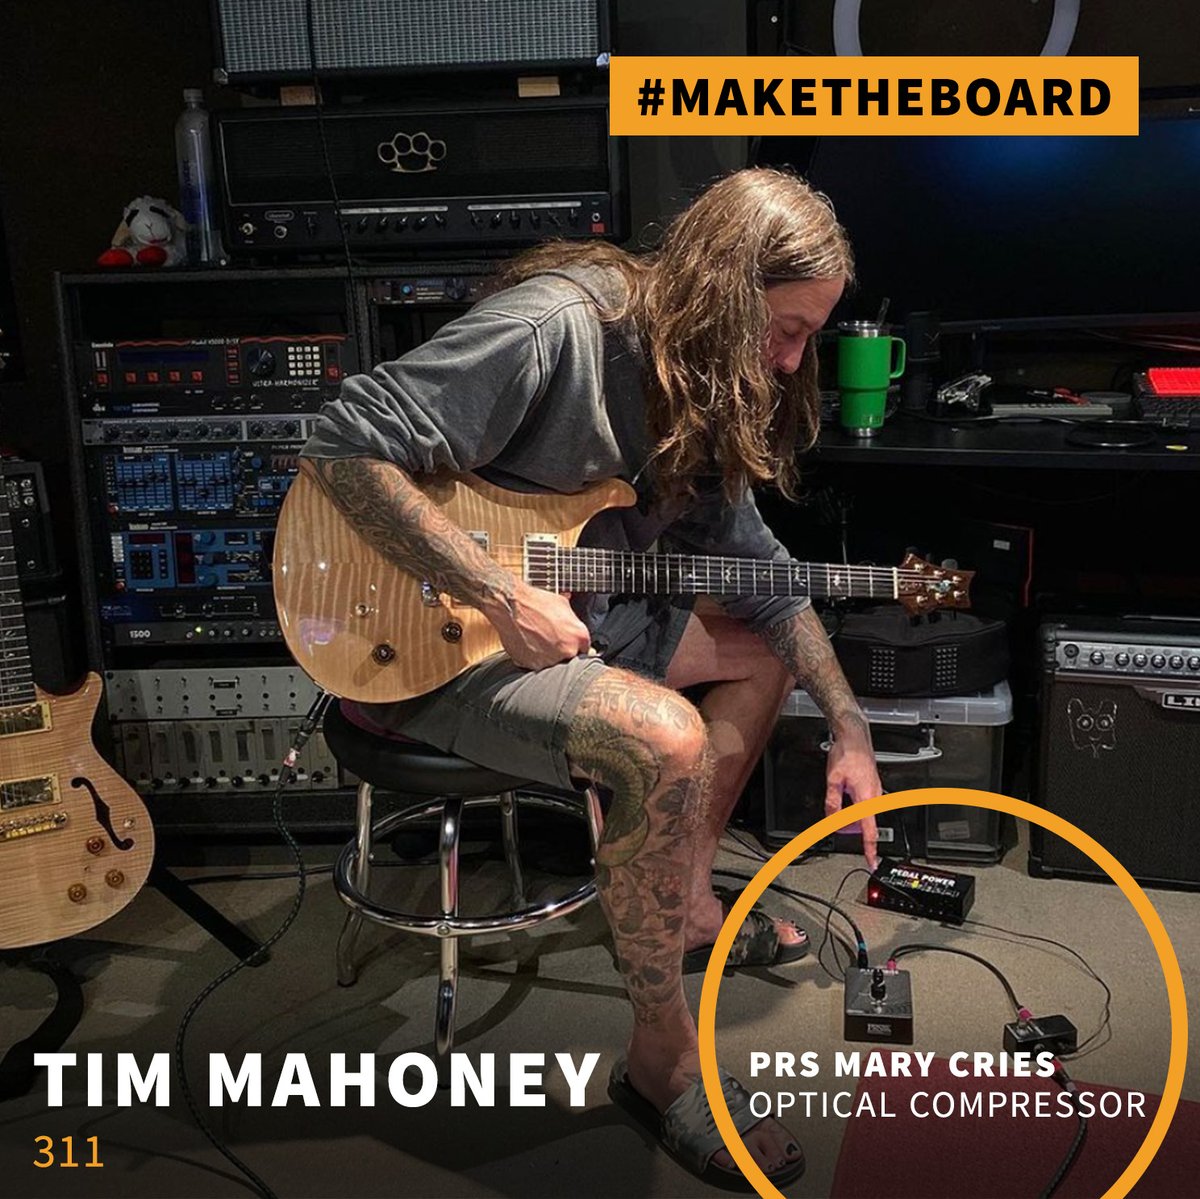 Tim Mahoney of 311 with his PRS Mary Cries Optical Compressor. We think it's perfect for studio or stage, tell us how you like to use your PRS pedal by using the hashtag #maketheboard on your post.